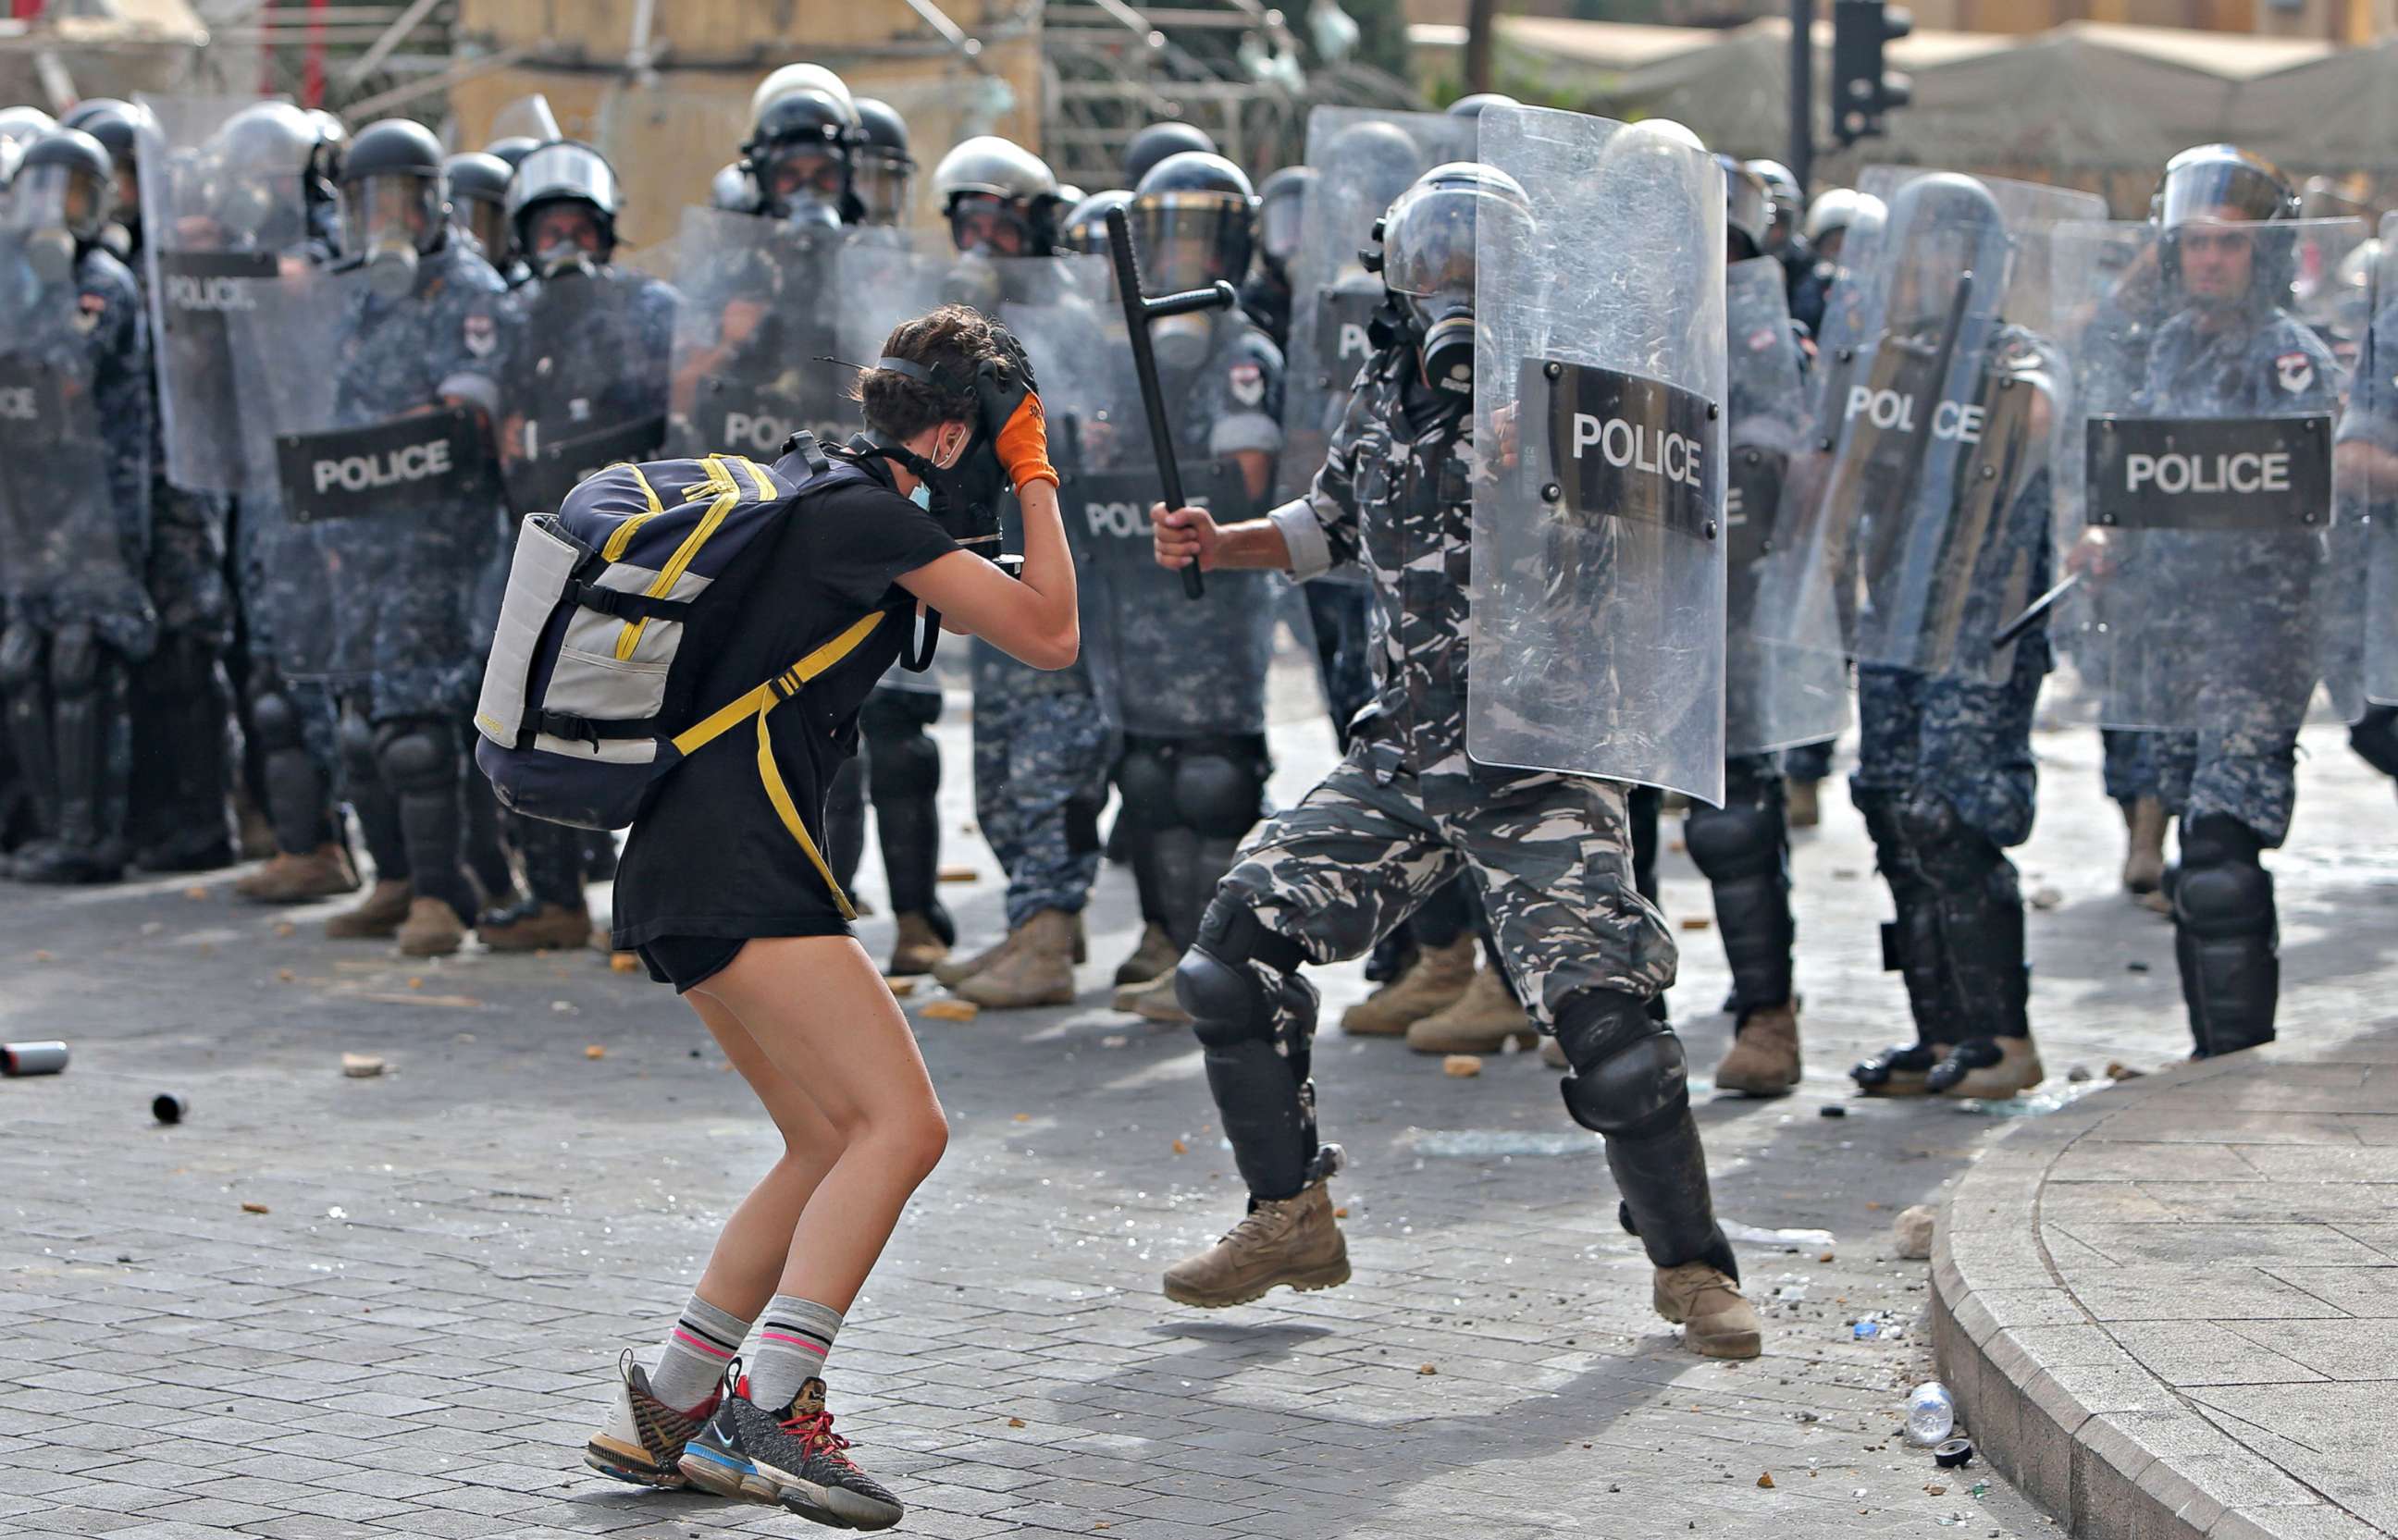 PHOTO: A policeman hits a demonstrator during clashes in downtown Beirut on Aug. 8, 2020.